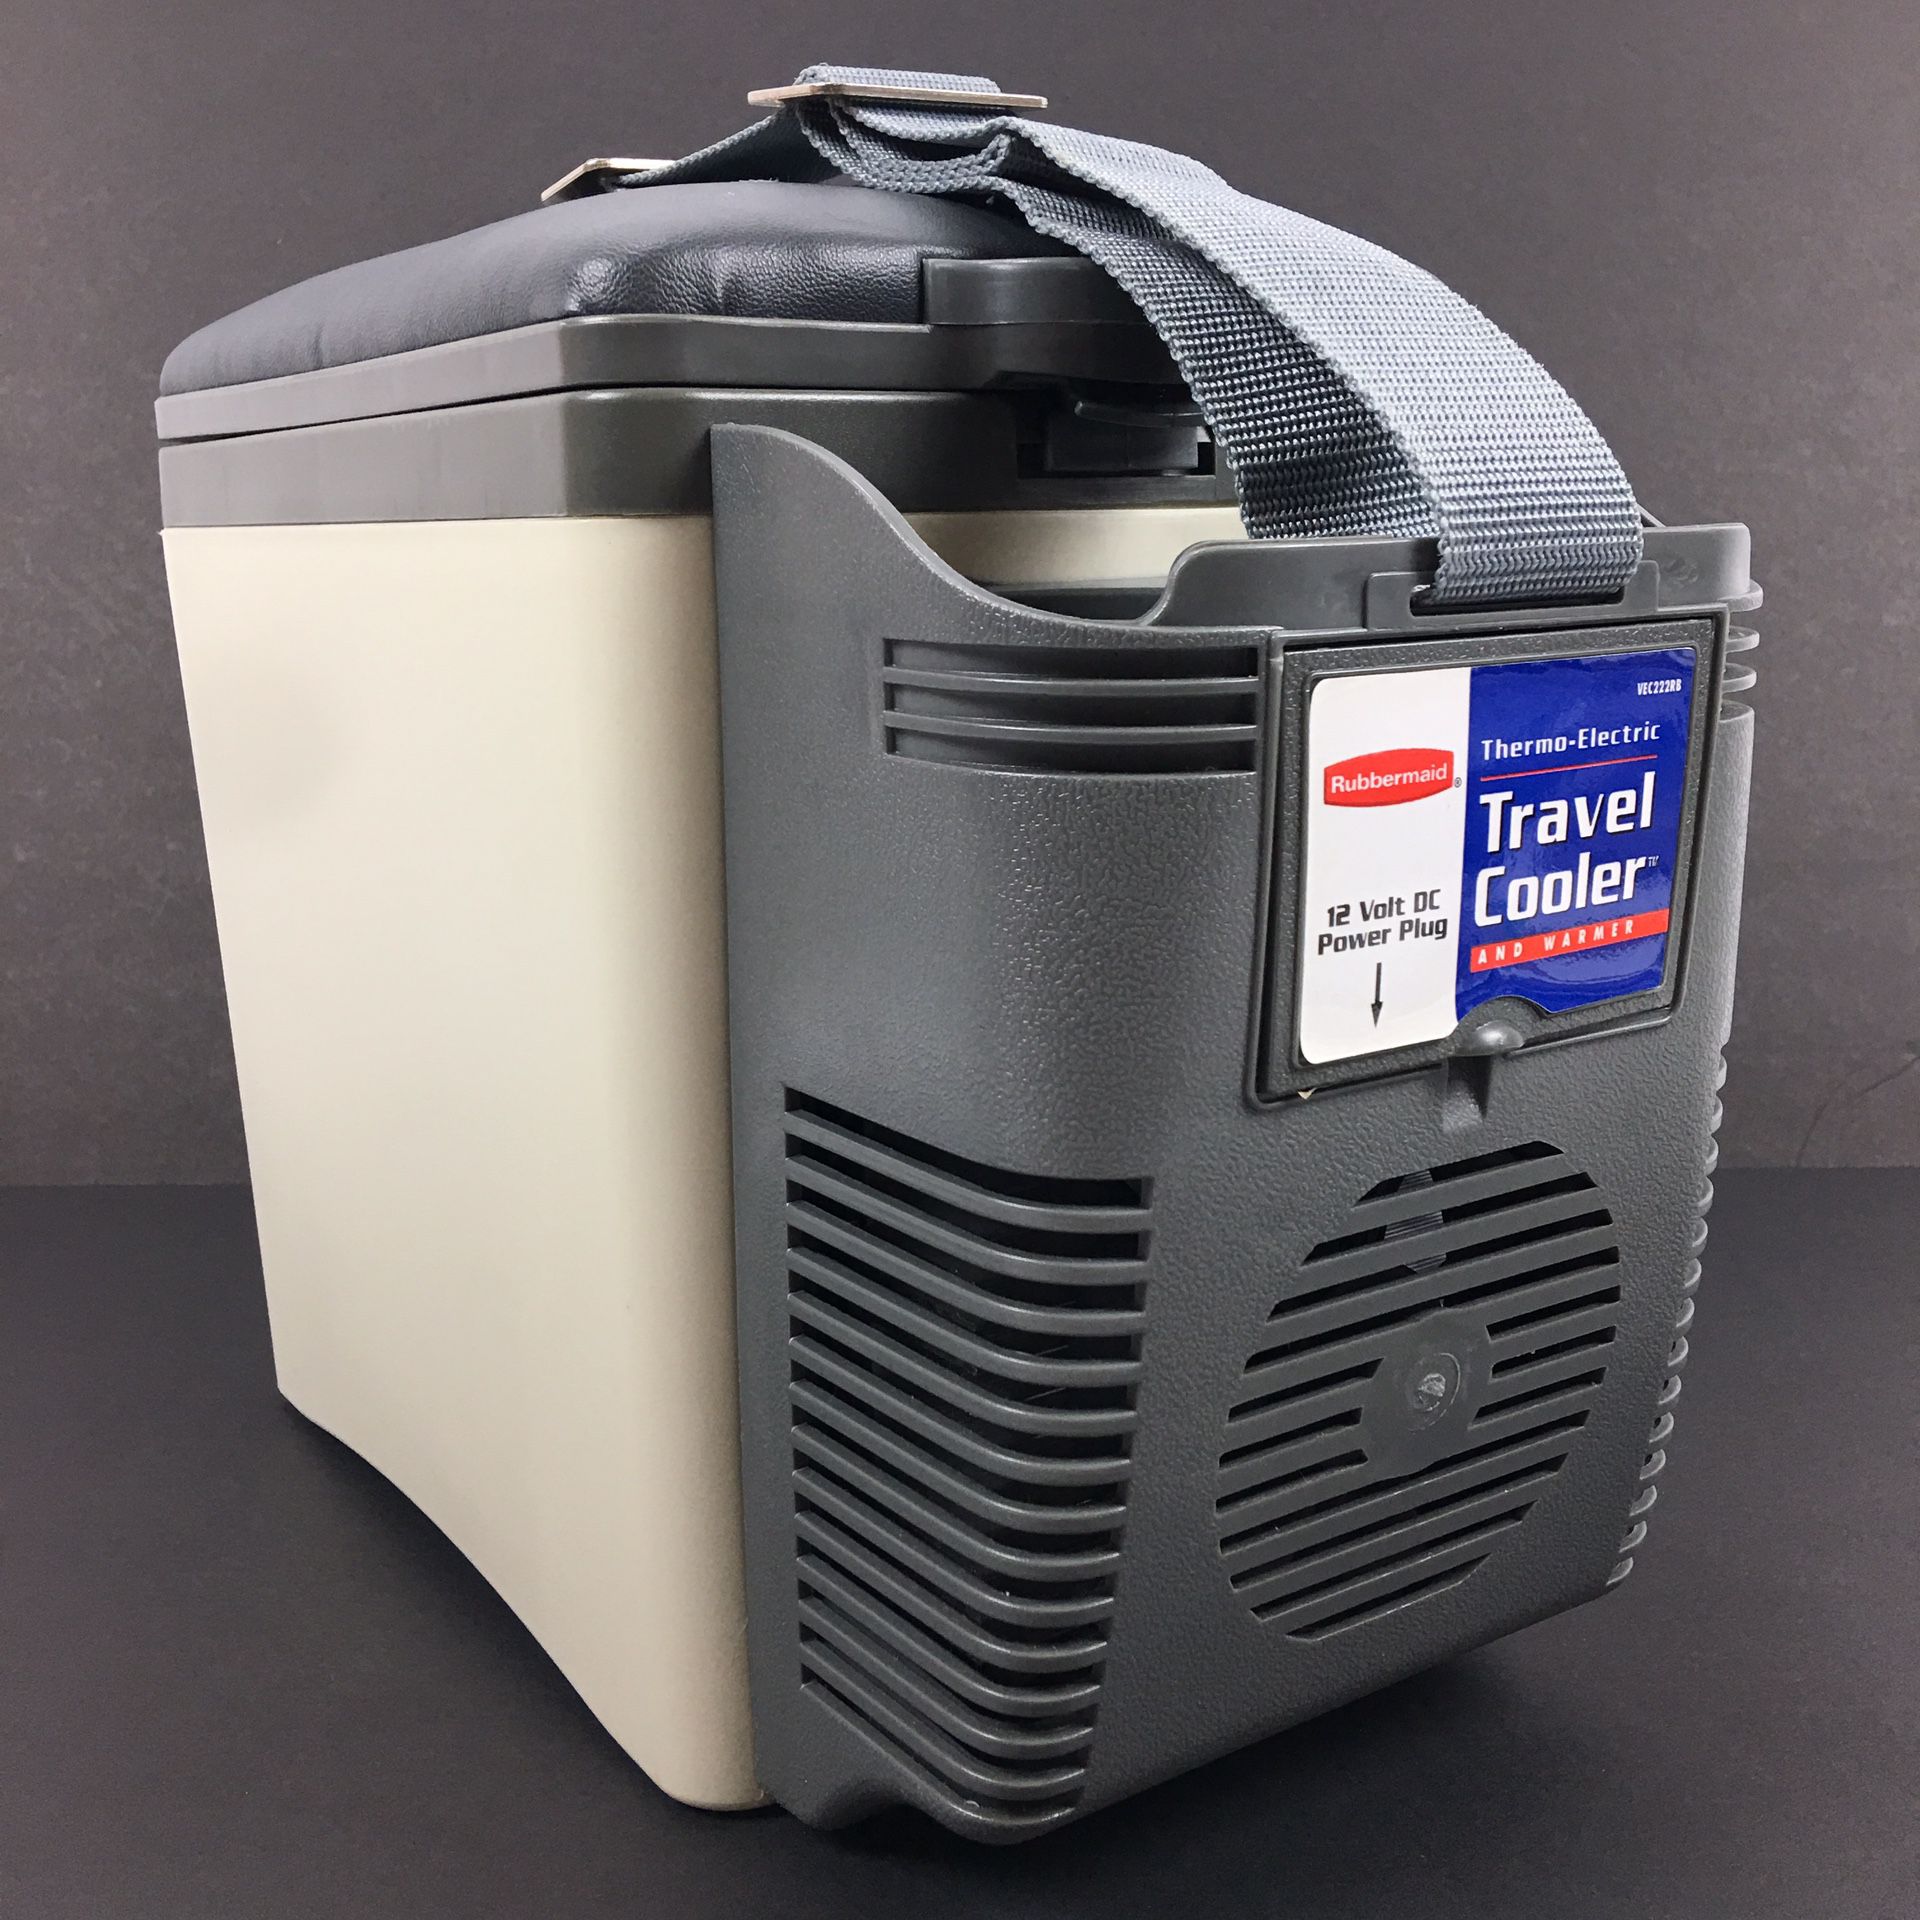 Rubbermaid Thermo Electric Travel Cooler and Warmer